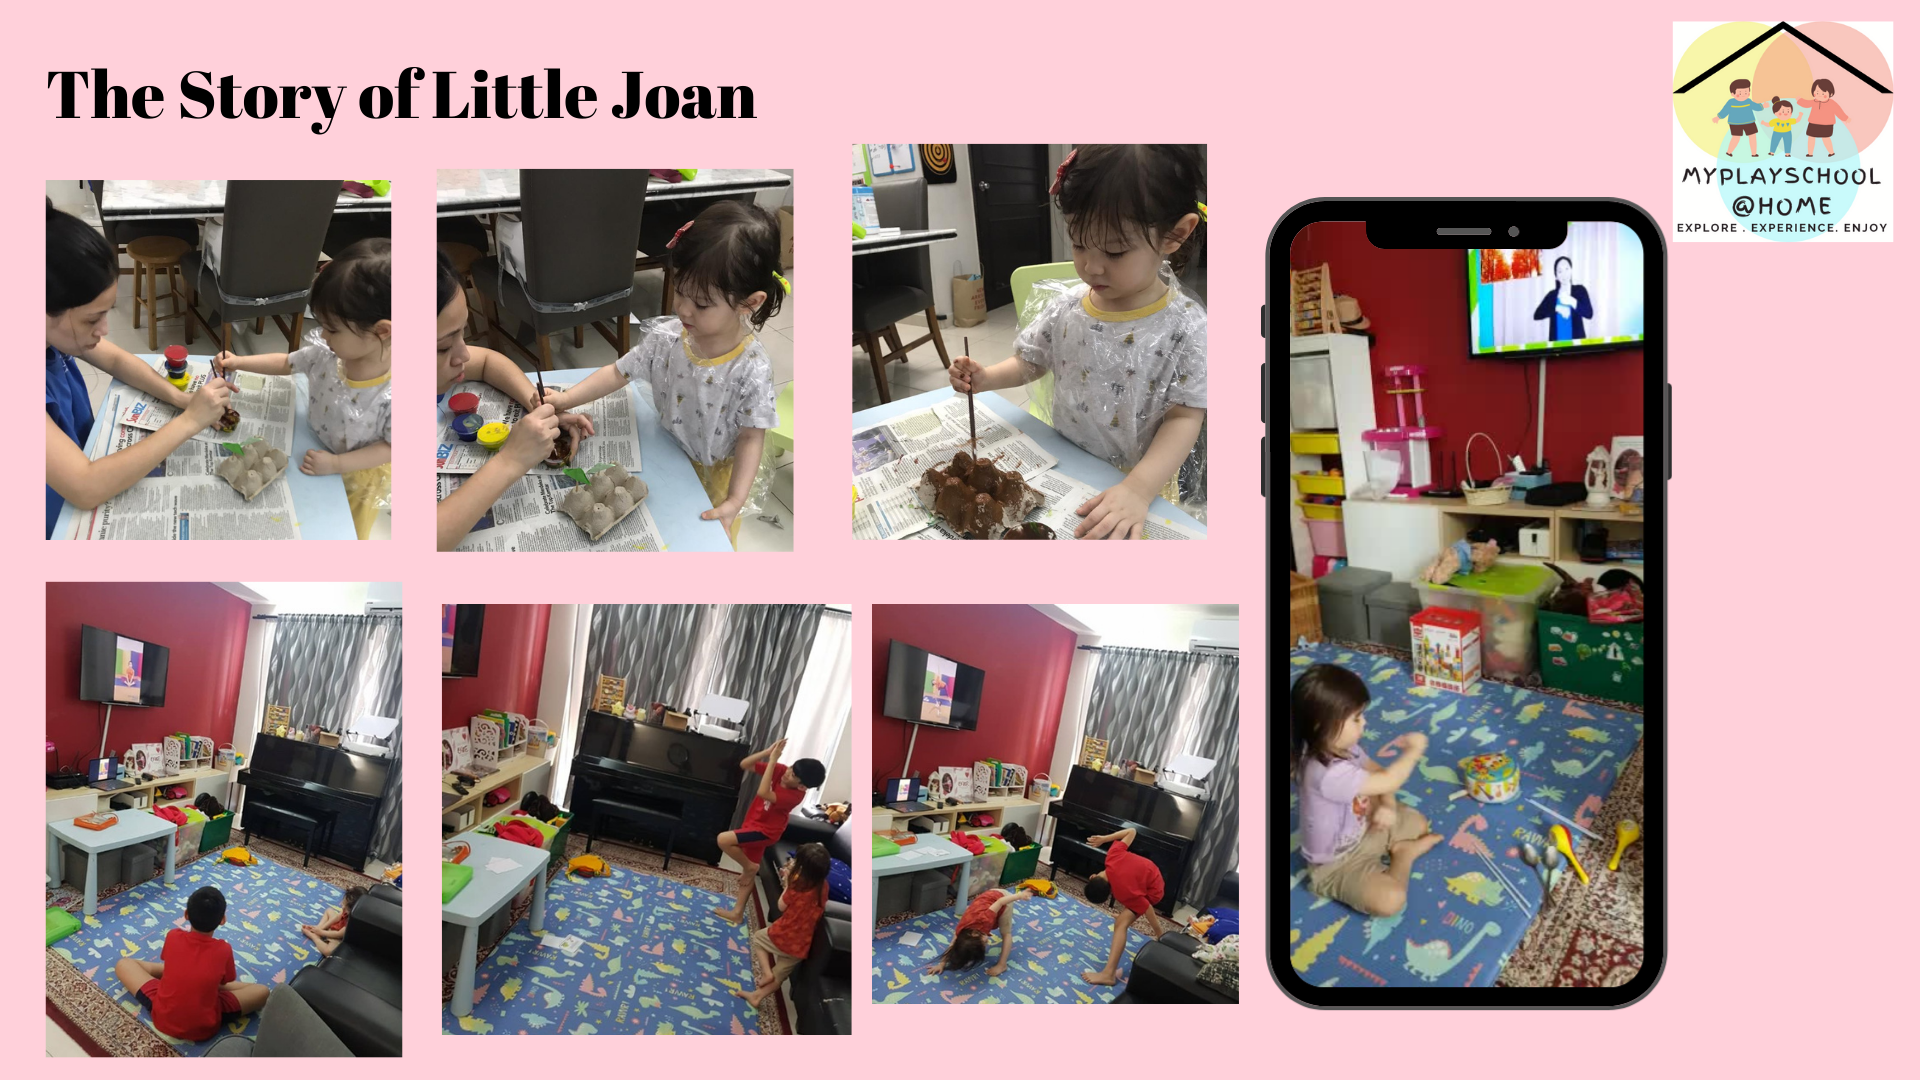 The story of little Joan with MyPlaySchoolatHome